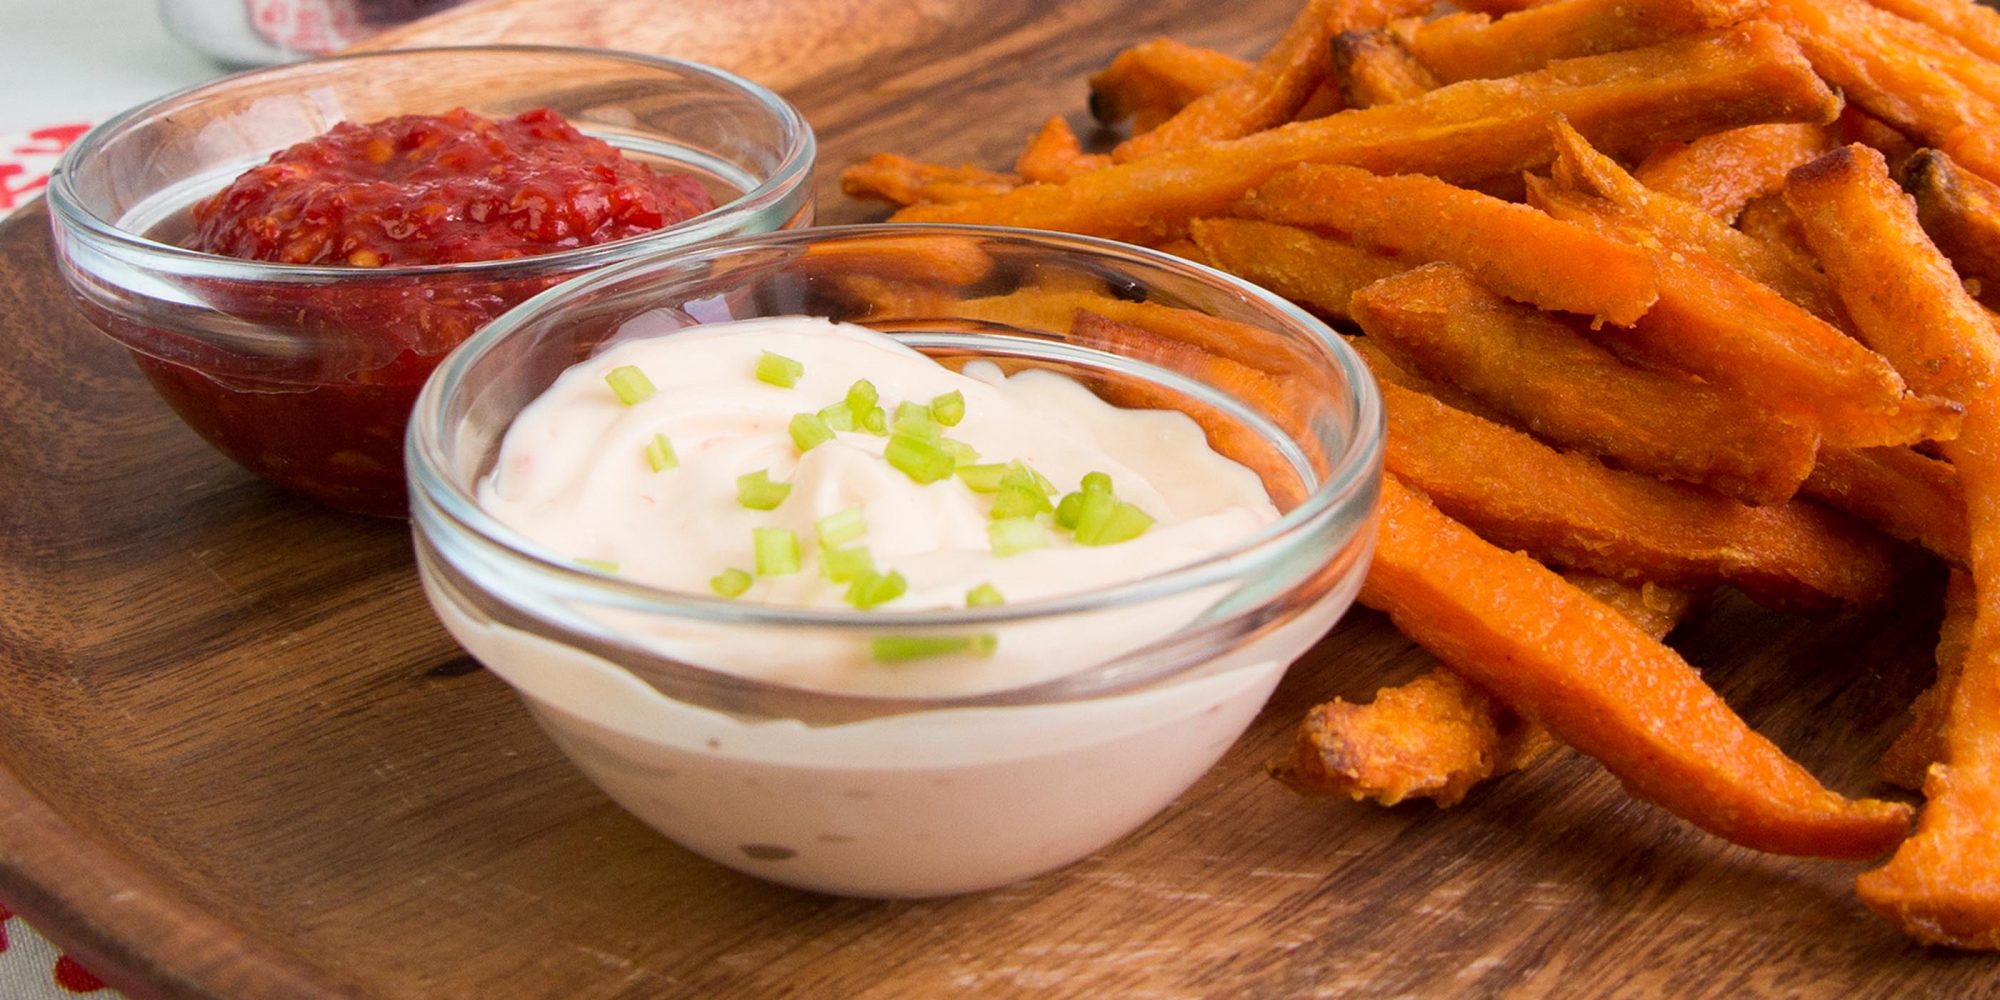 Roasted Sweet Potato Fries with Asian Dipping Sauces